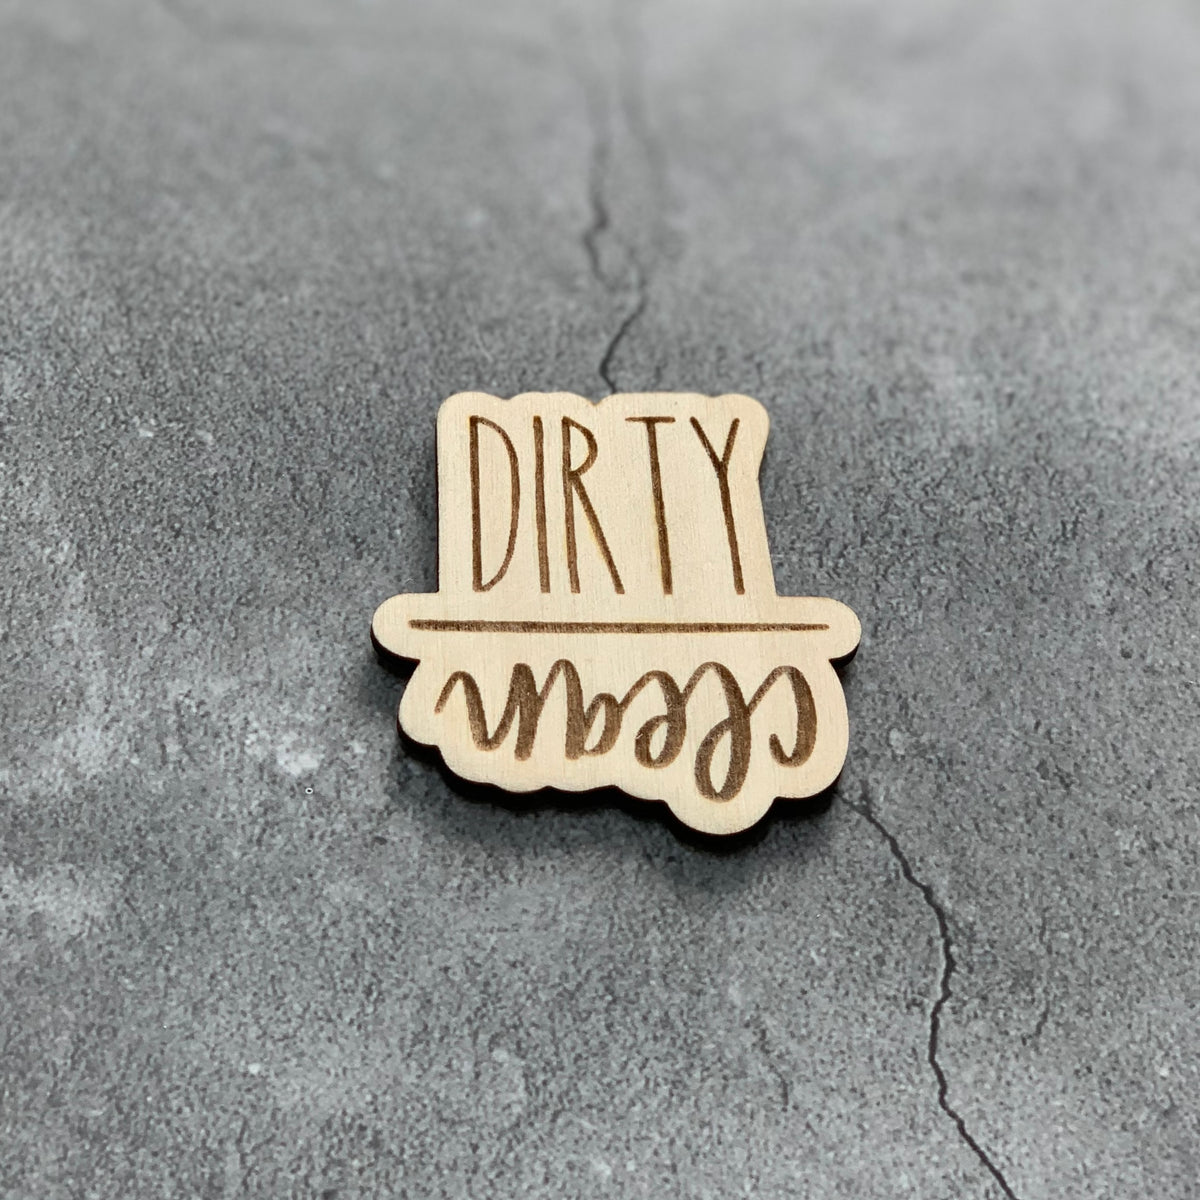 CLEAN DIRTY Farmhouse Inspired Dishwasher Magnet - Shiplap Look - Clea –  Laser in the Loft